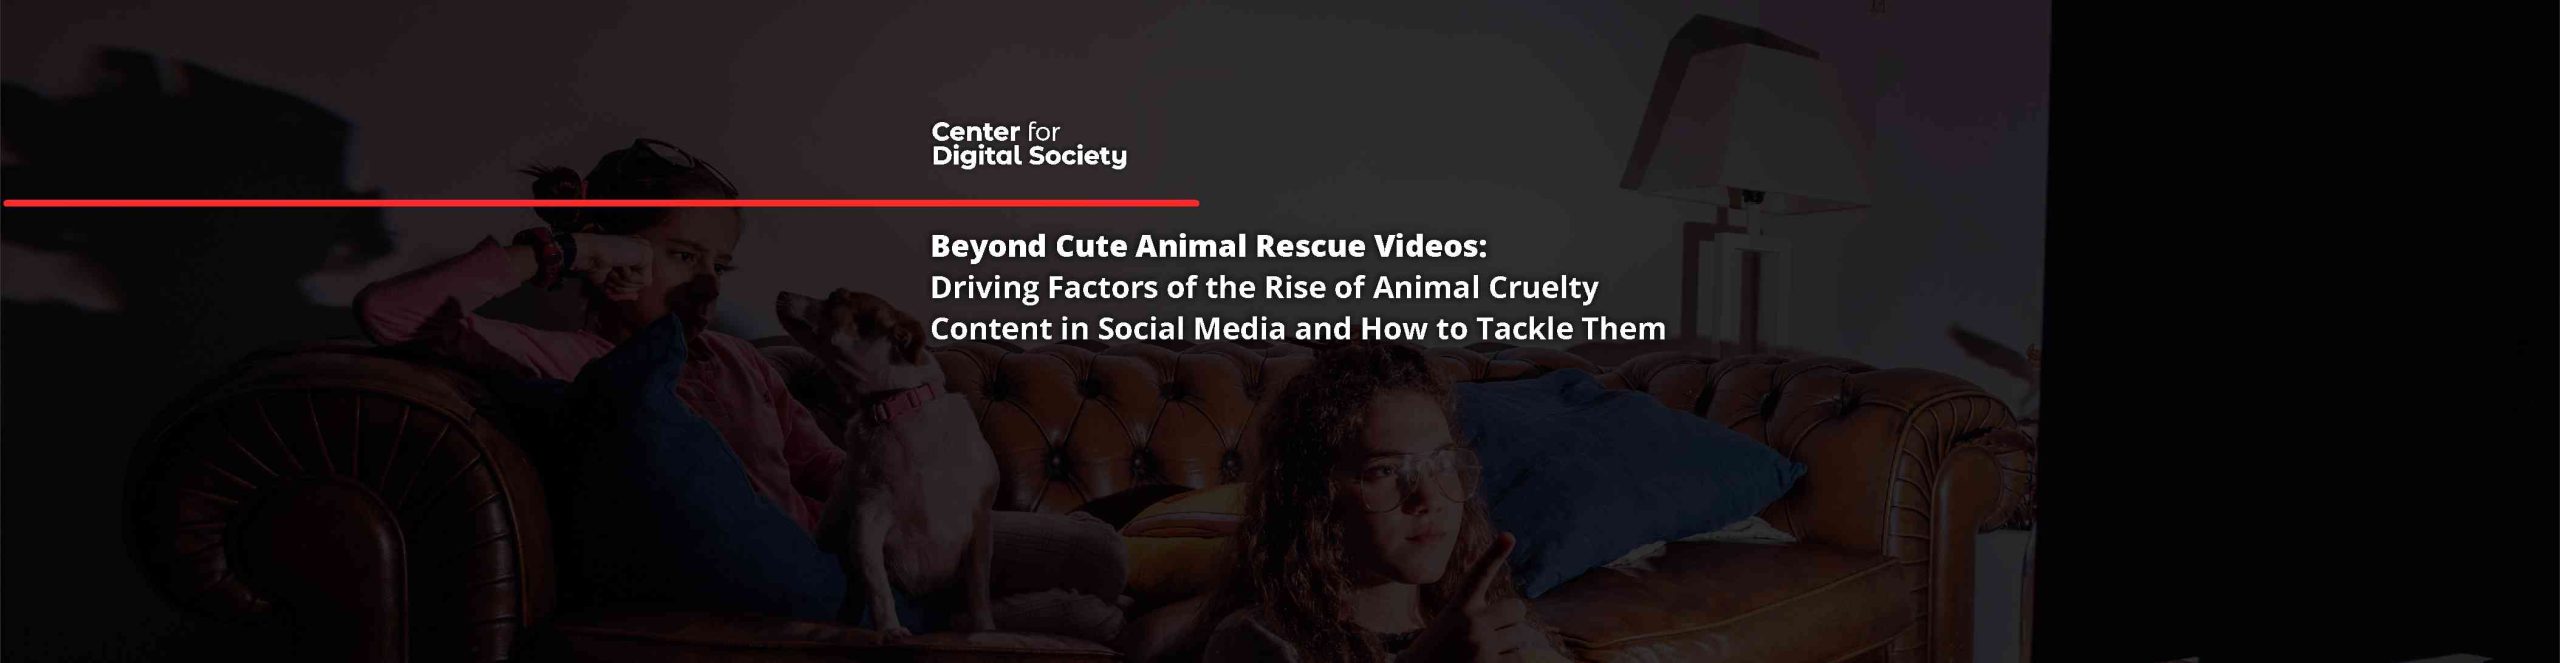 Beyond Cute Animal Rescue Videos: Driving Factors of the Rise of Animal Cruelty Content in Social Media and How to Tackle Them